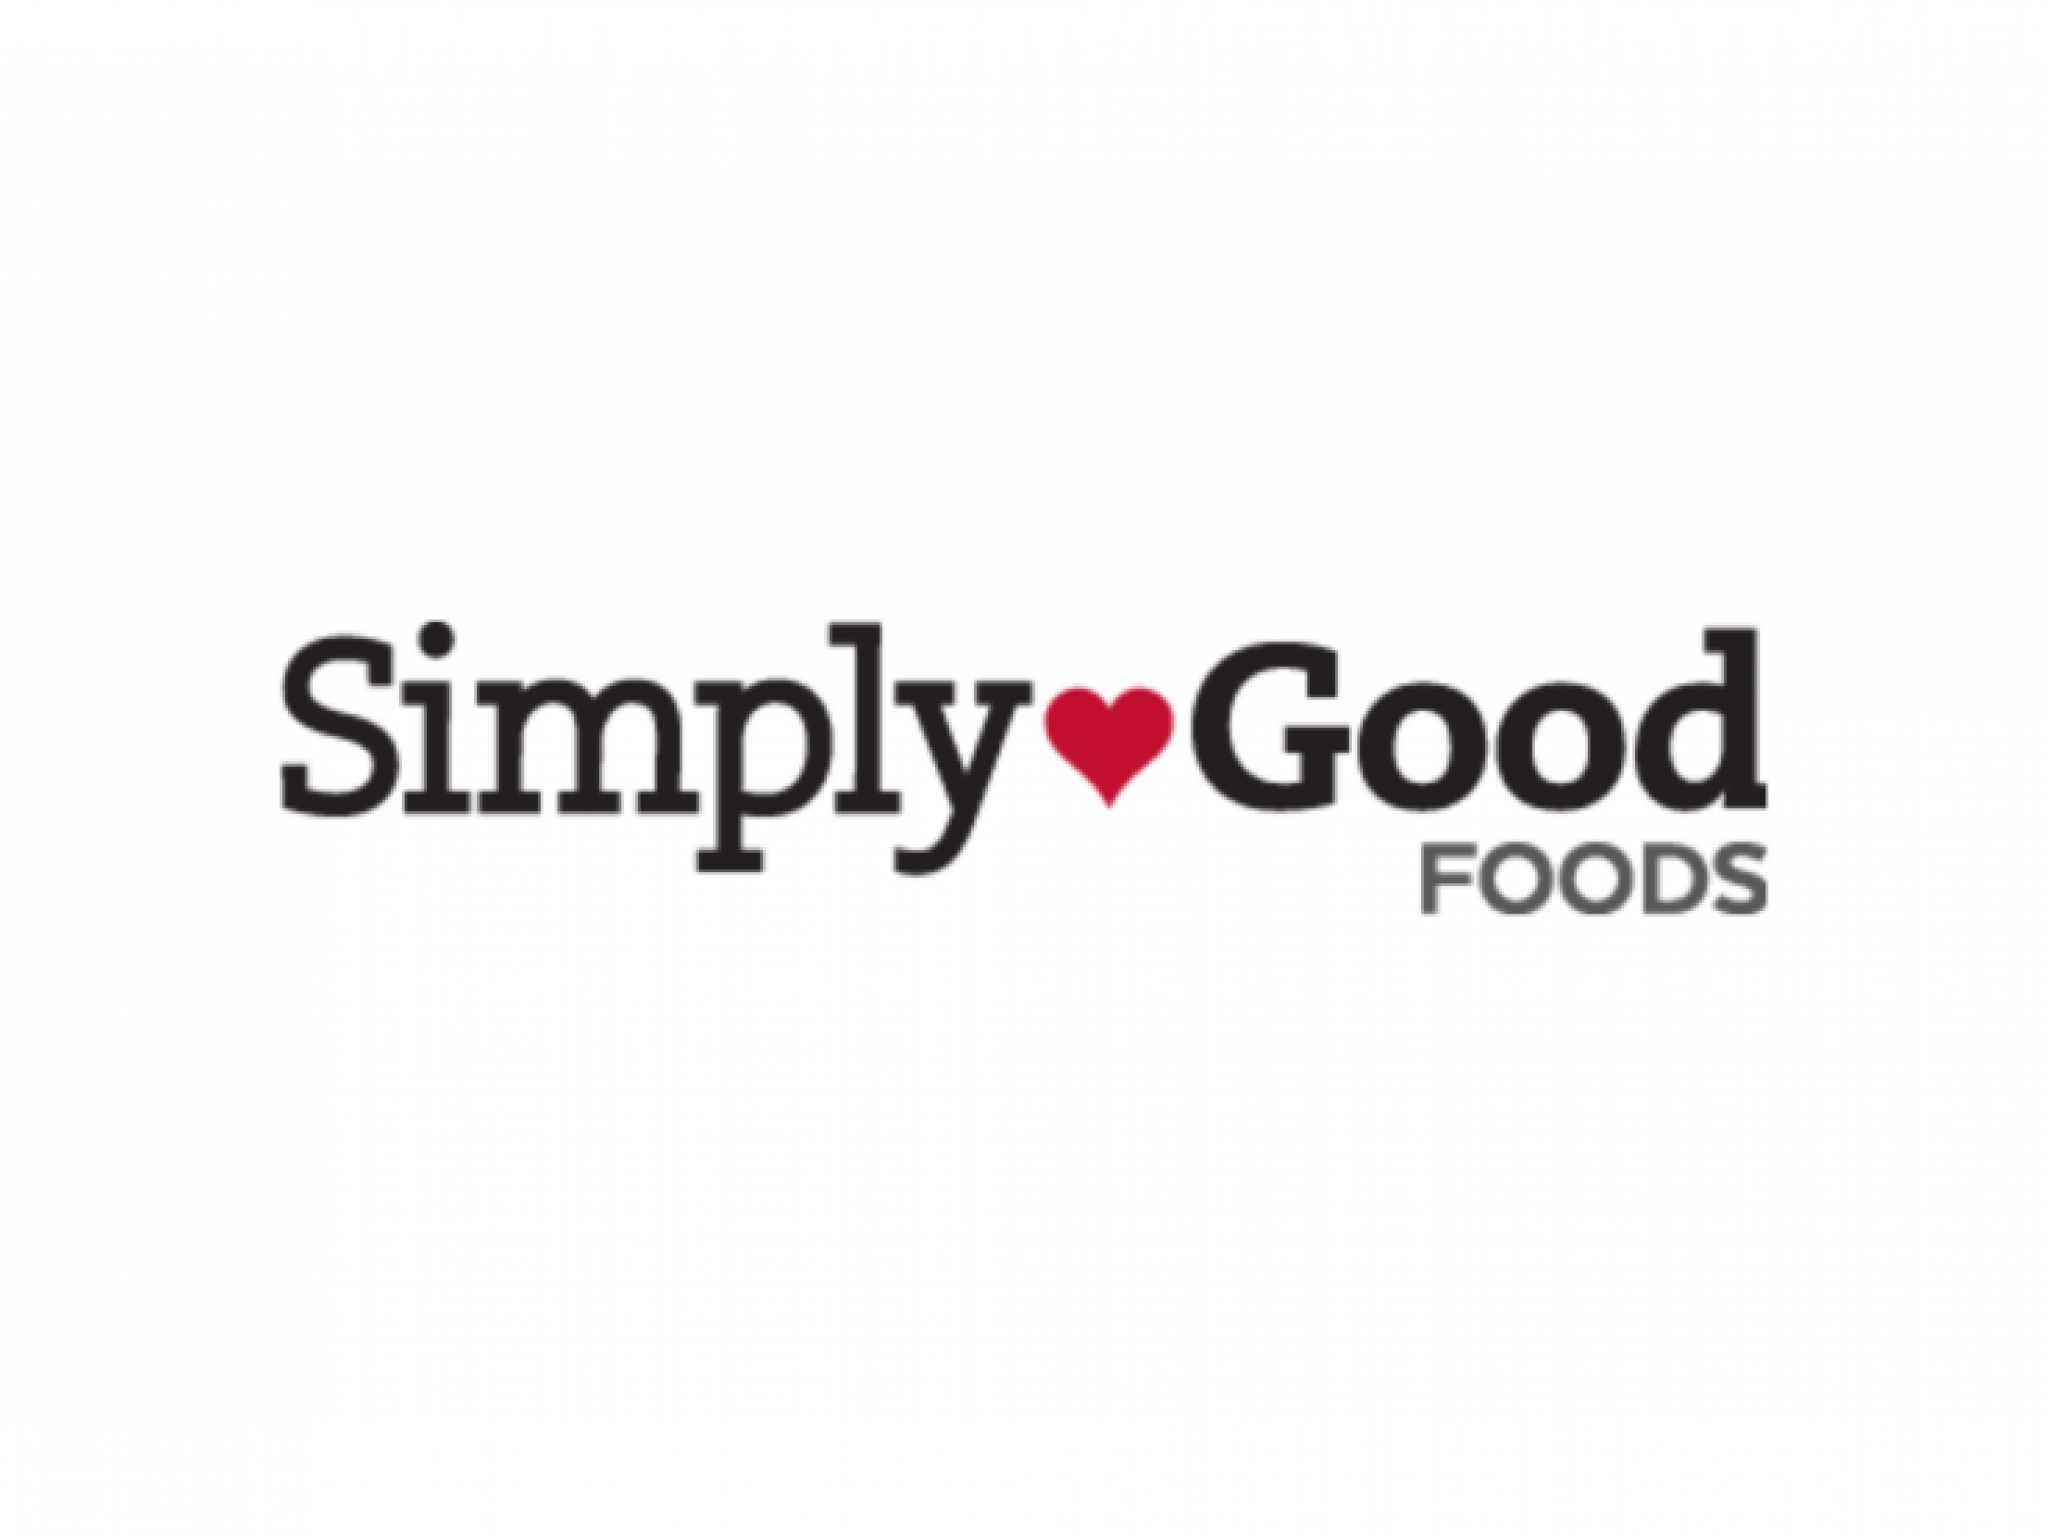  simply-good-foods-consumption-trends-looks-grim-for-q2-says-analyst 